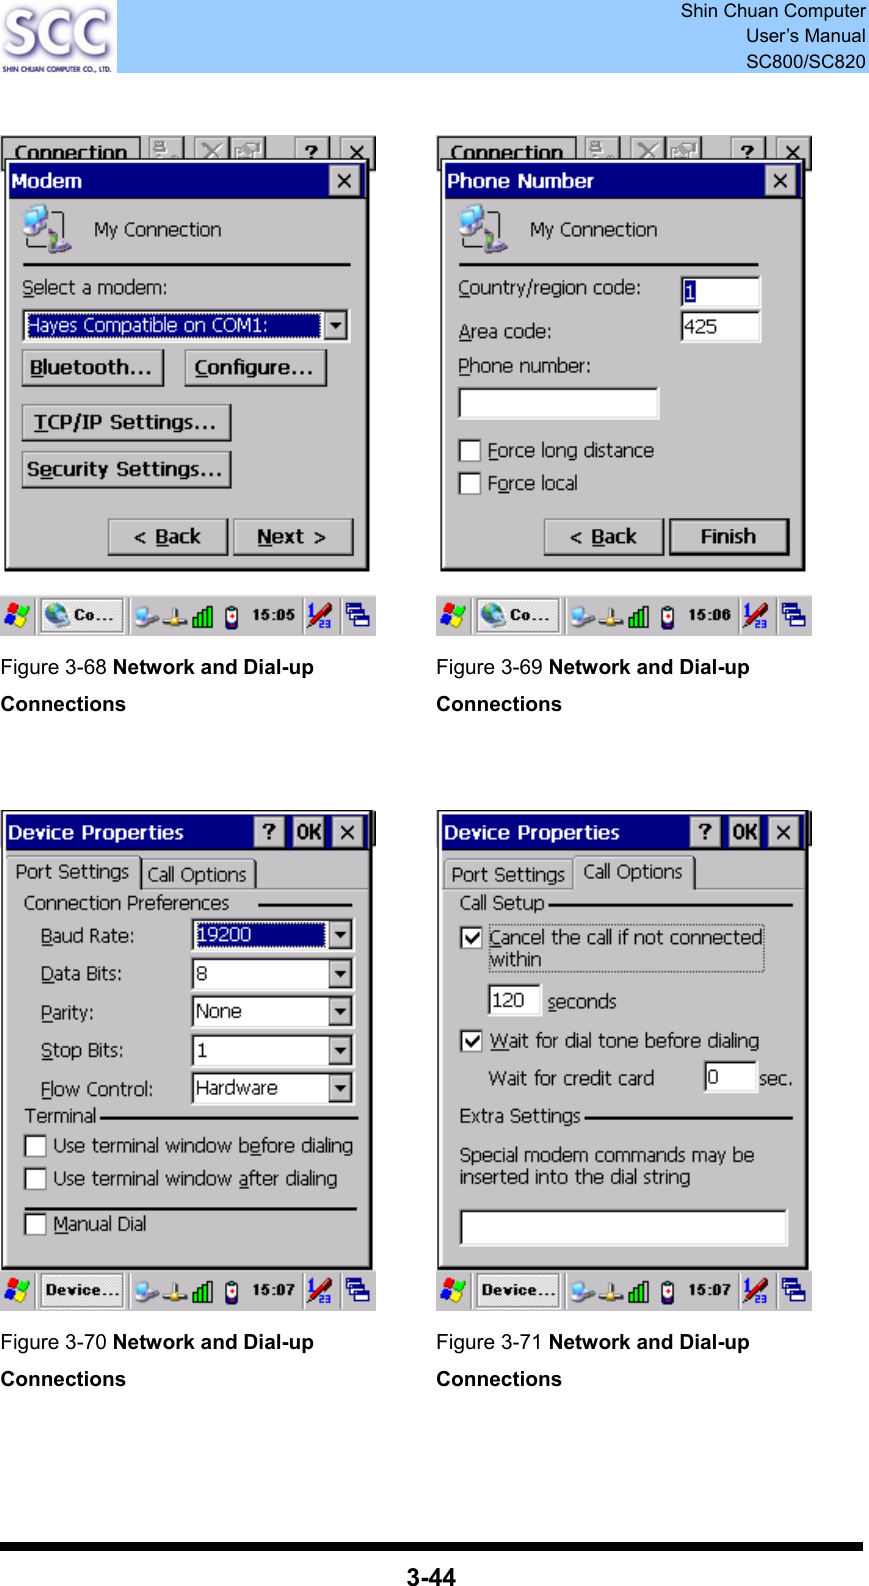  Shin Chuan Computer User’s Manual SC800/SC820  3-44     Figure 3-68 Network and Dial-up Connections Figure 3-69 Network and Dial-up Connections      Figure 3-70 Network and Dial-up Connections Figure 3-71 Network and Dial-up Connections     